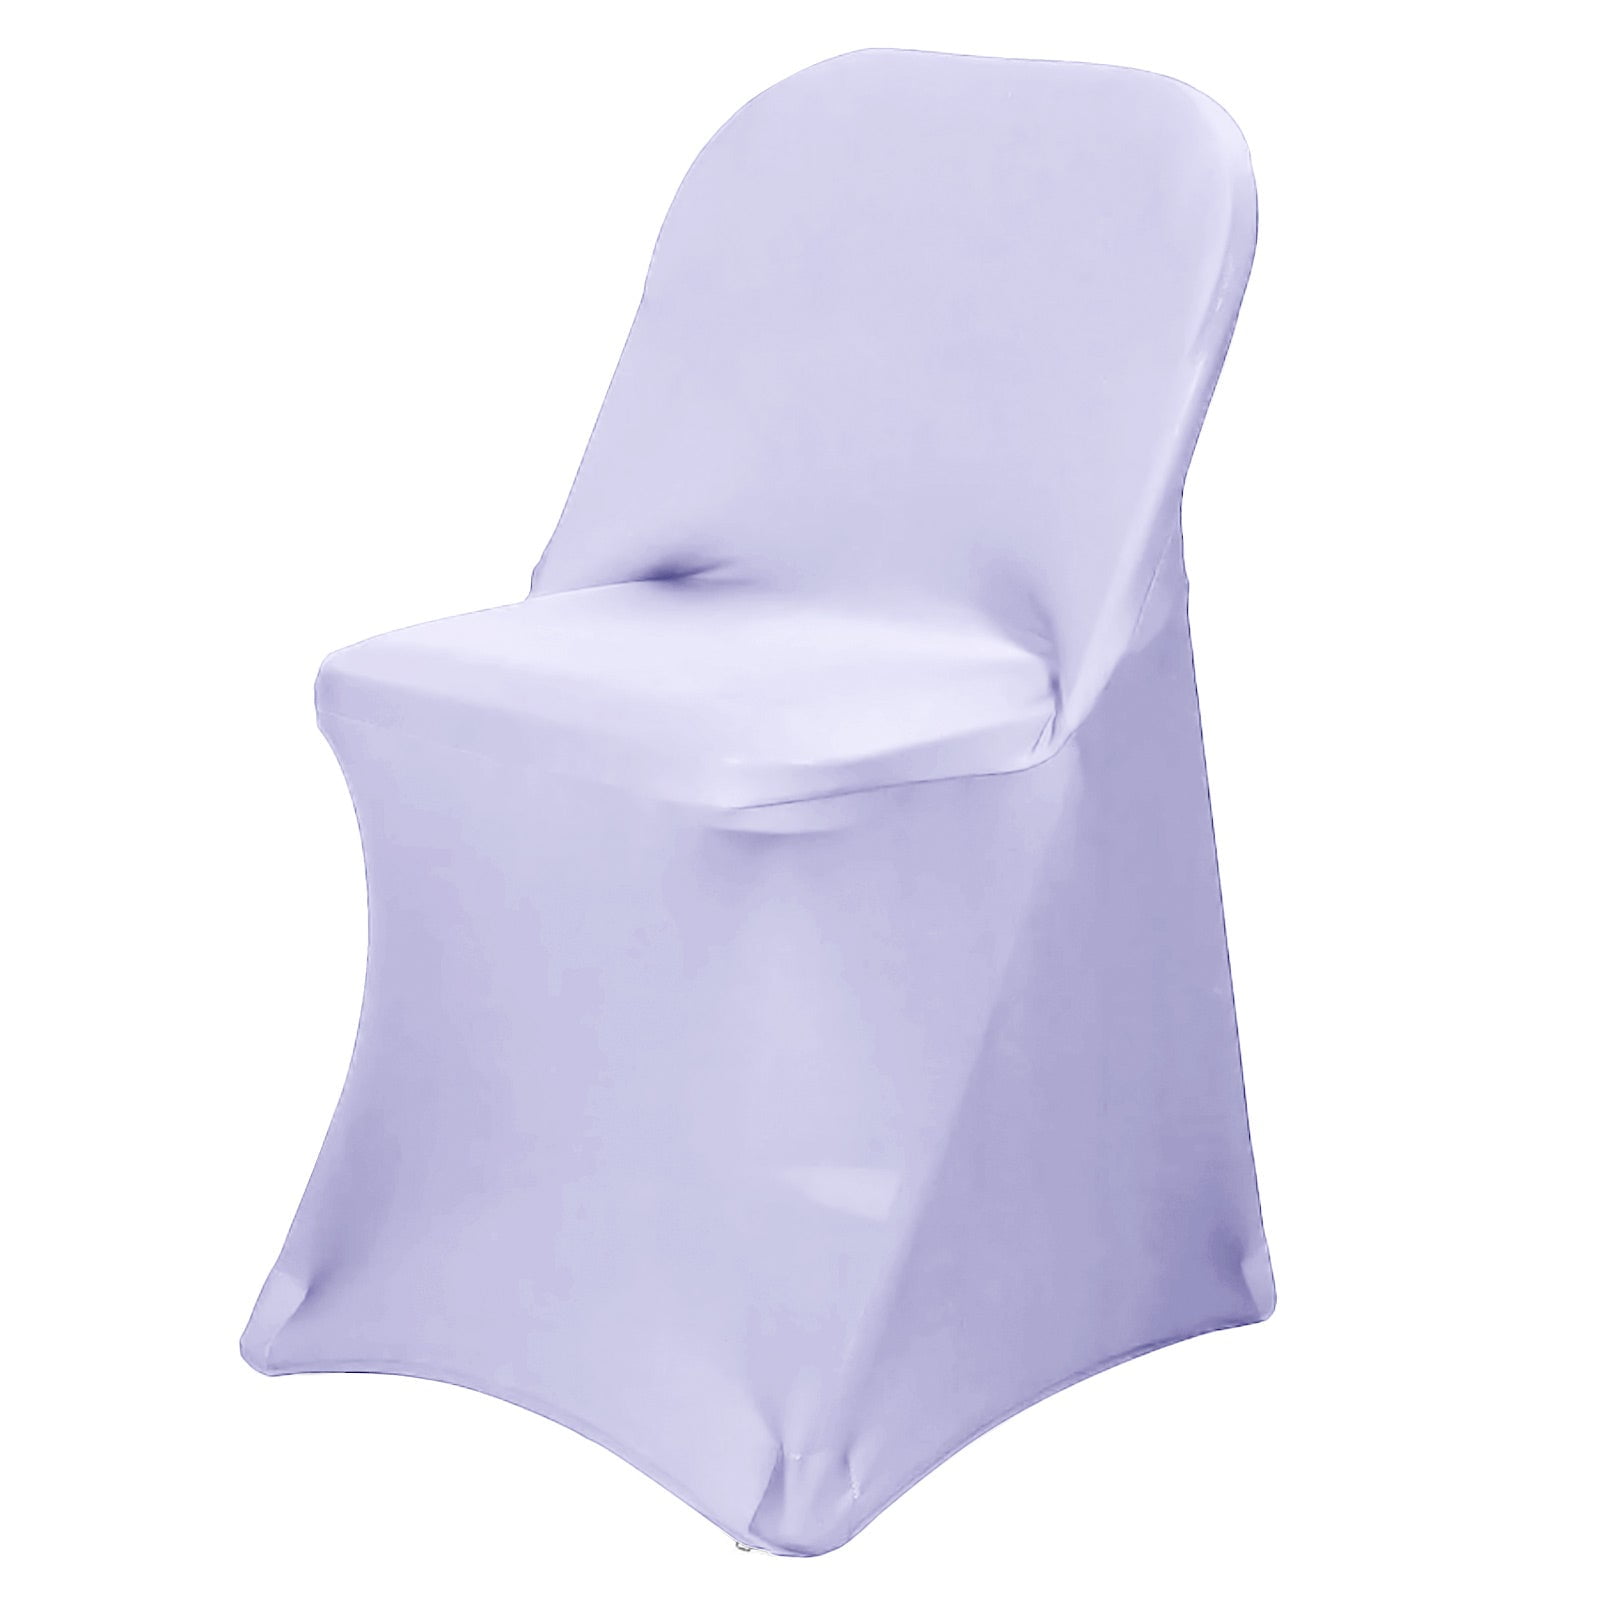 Efavormart Stretchy Spandex Fitted Folding Chair Cover Dinning